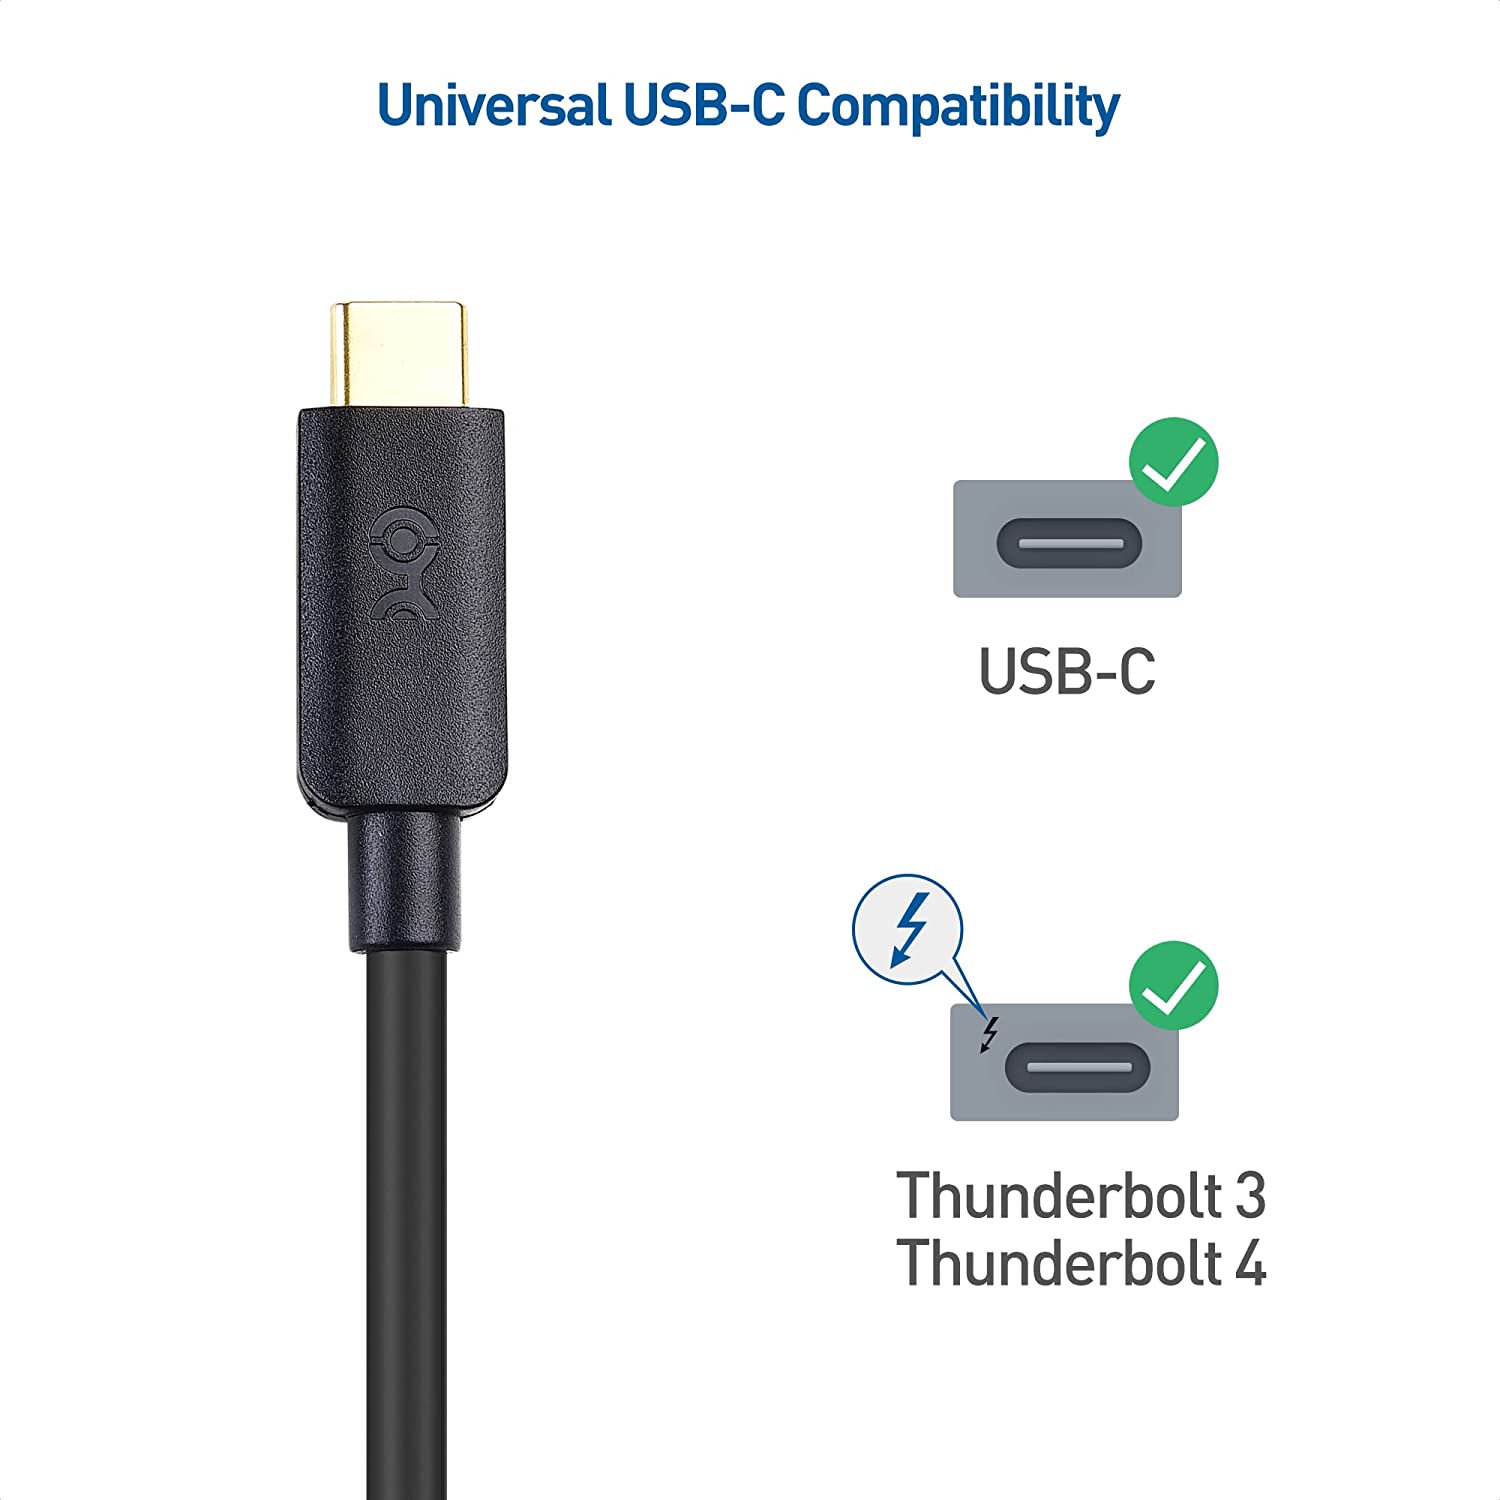 Cable Matters USB C to Micro USB 3.0 Cable (USB C to Micro B 3.0, USB C Hard Drive Cable) in Black 3.3 Feet - image 4 of 7